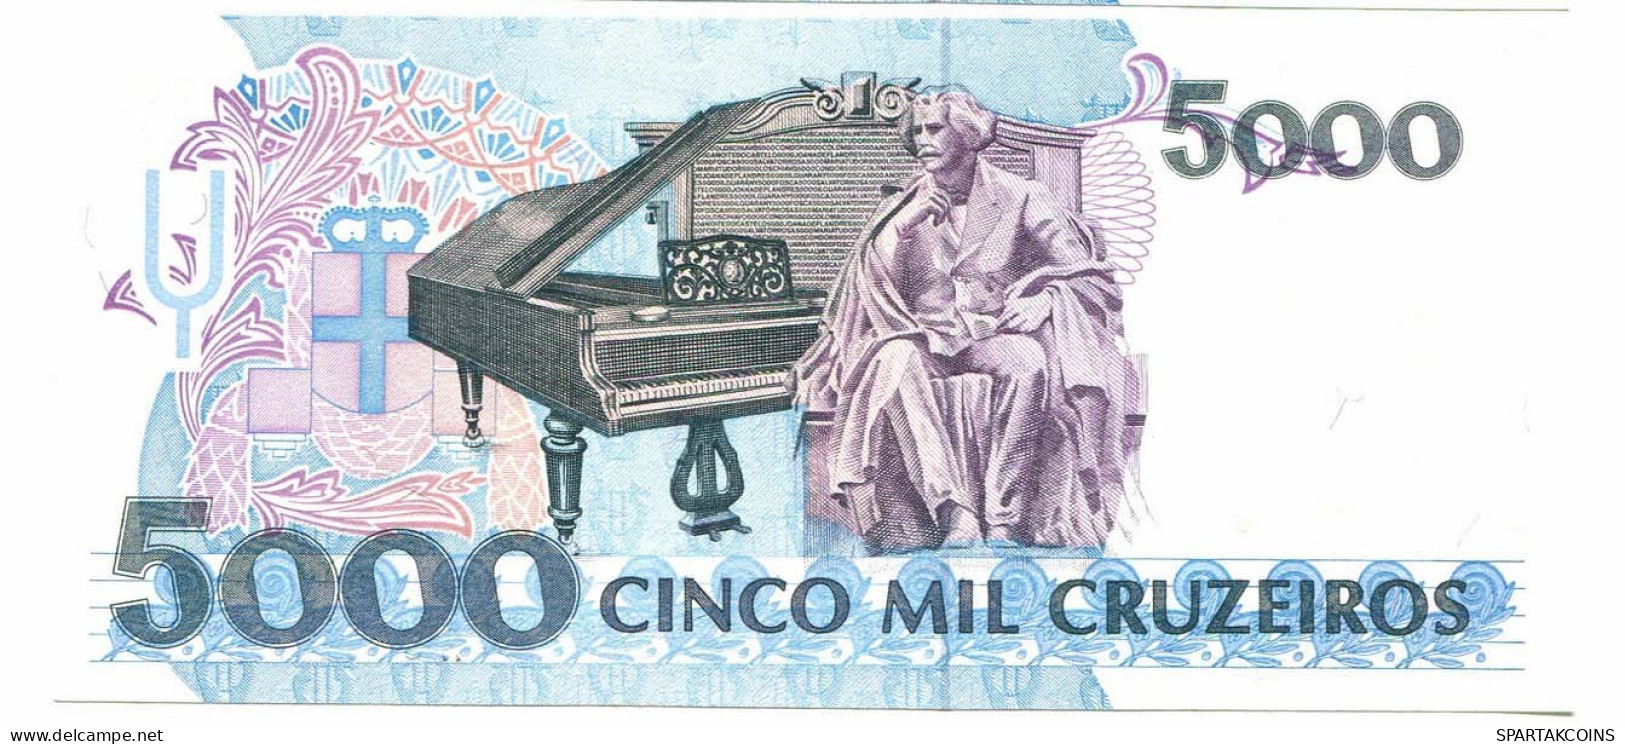 BRASIL 5000 CRUZEIROS 1993 UNC Paper Money Banknote #P10883.4 - [11] Local Banknote Issues